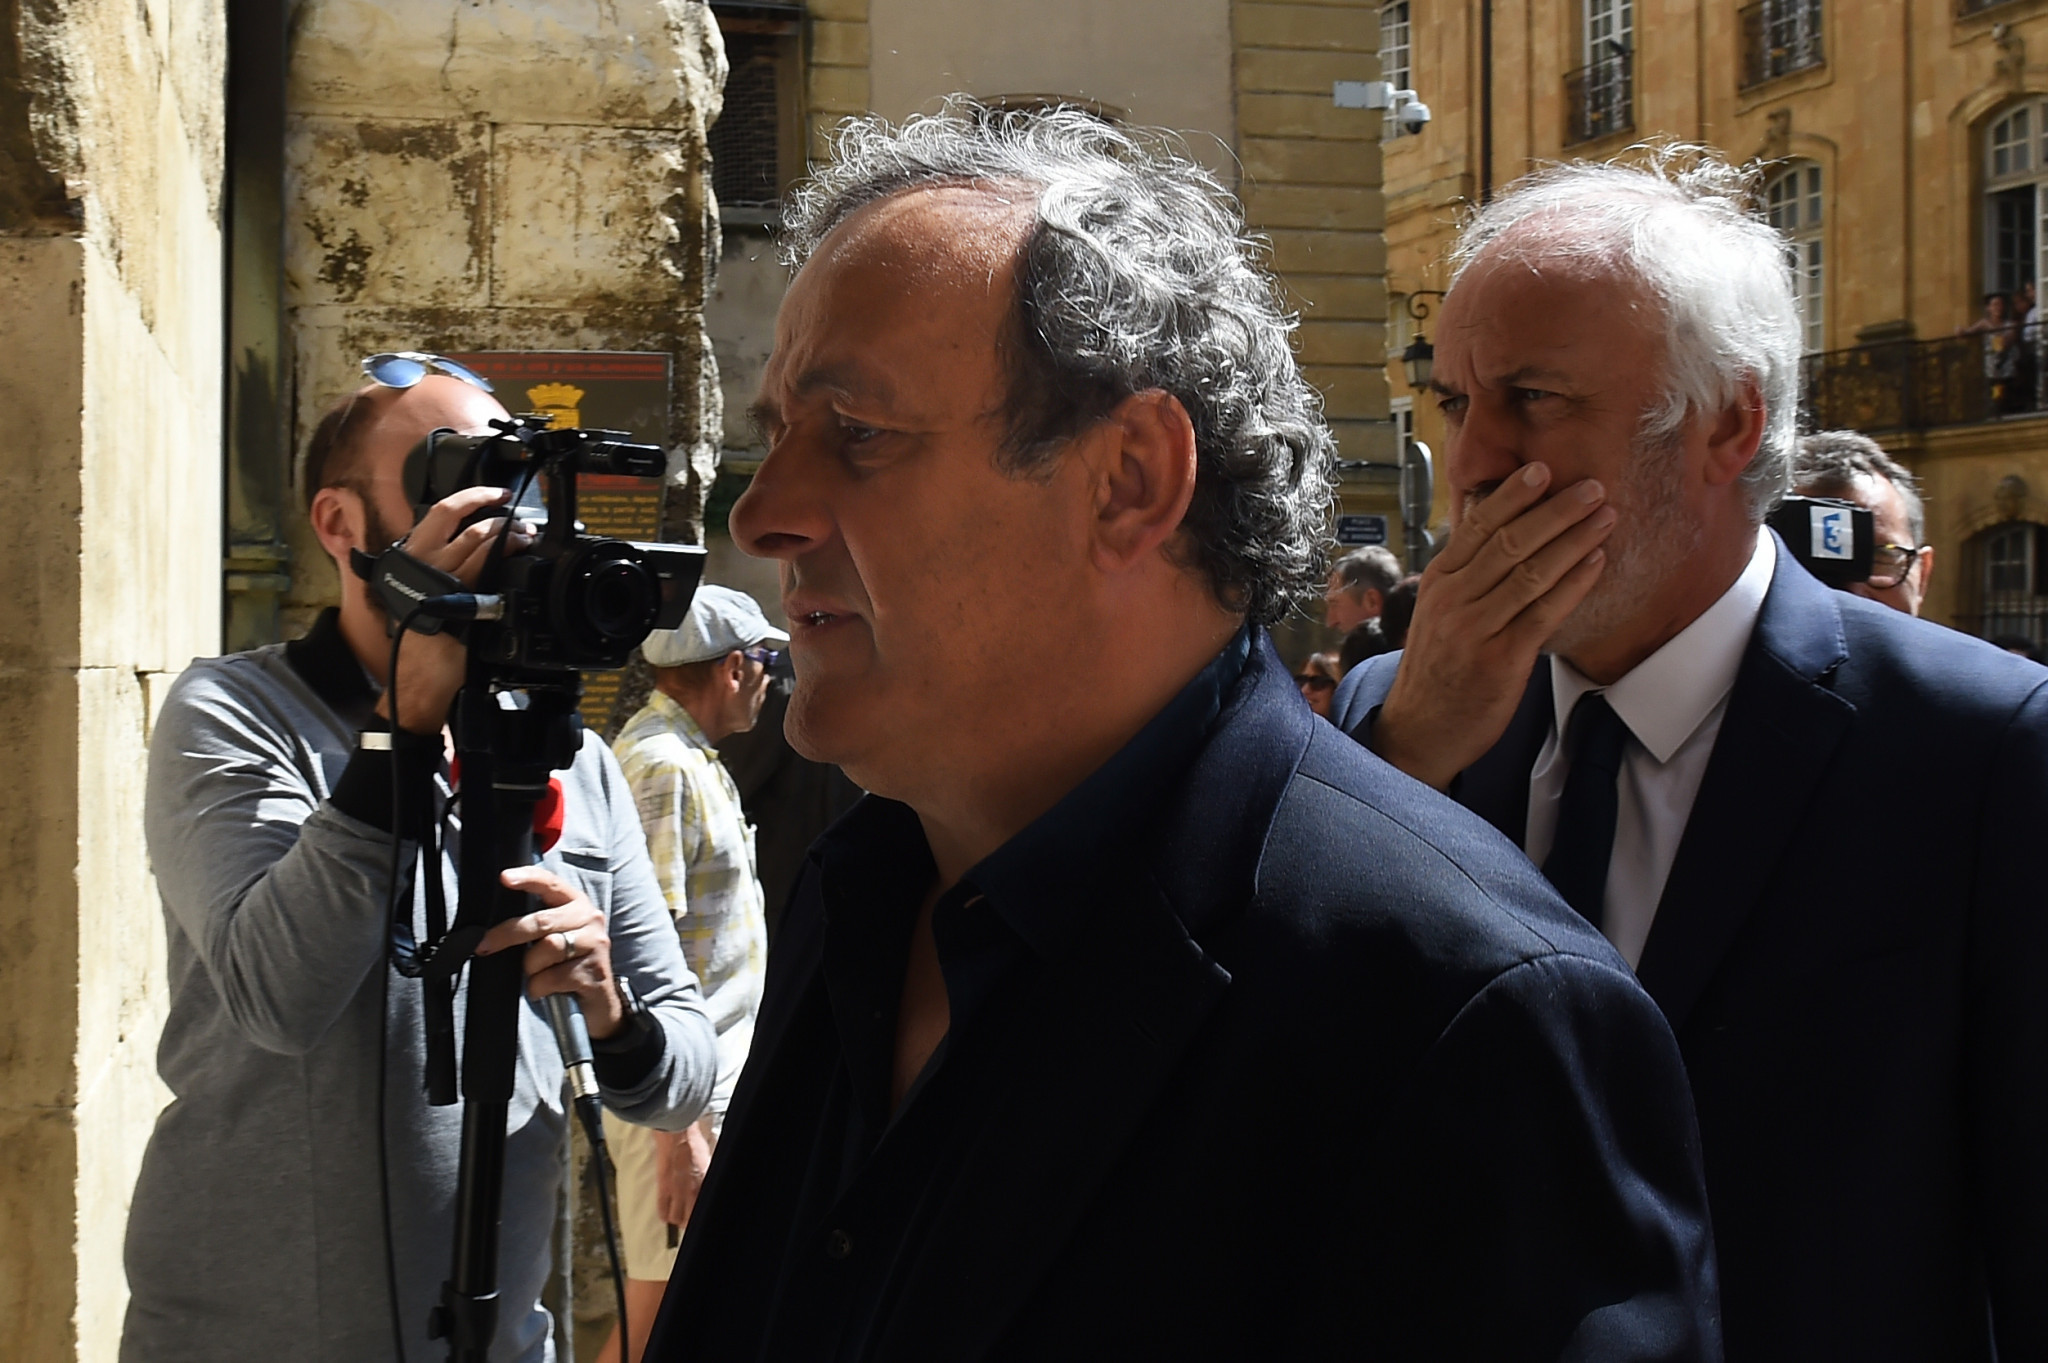 Michel Platini was detained for questioning at the Anti-Corruption Office of the Judicial Police in Paris over his role in the decision by FIFA to award Qatar the 2022 World Cup ©Getty Images